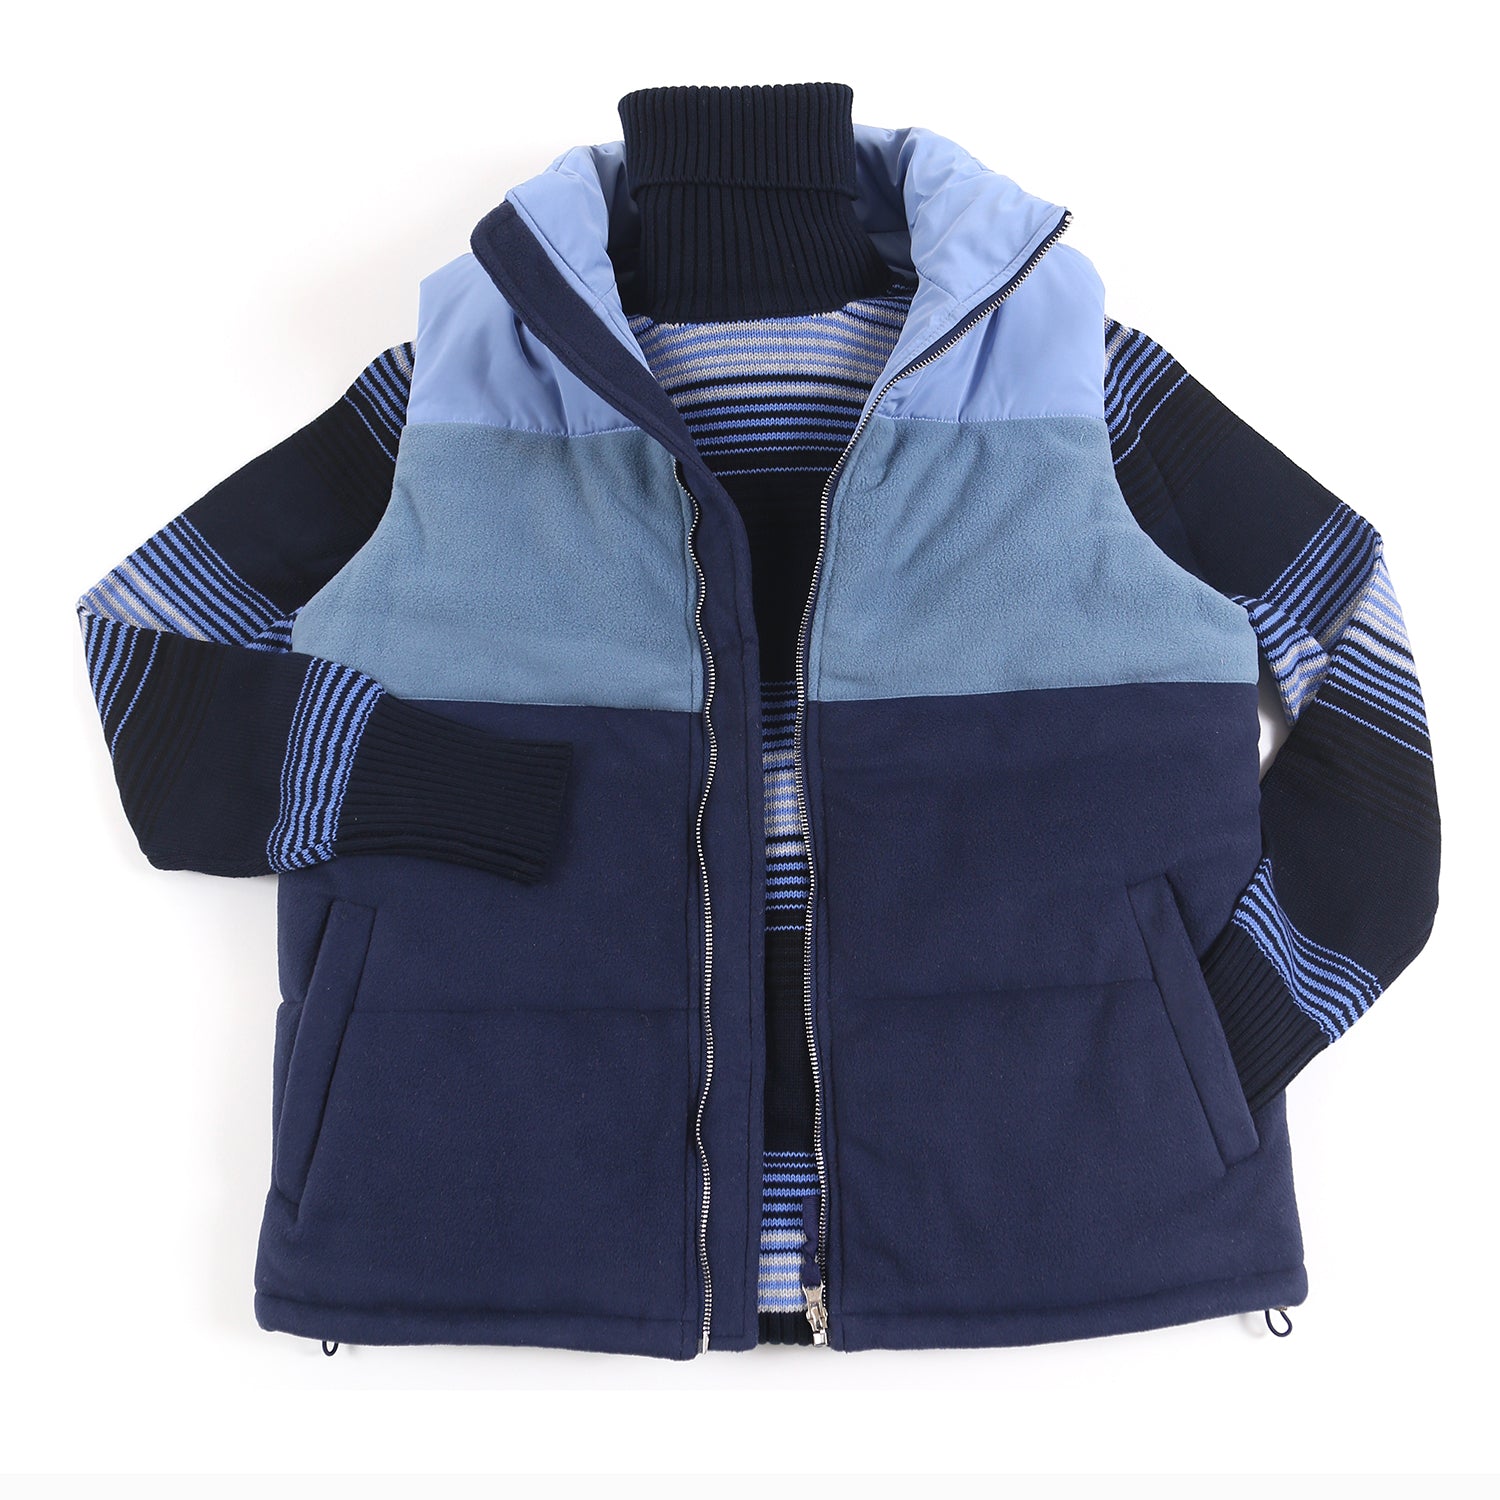 SAVE 70%- Blue Satin and Fleece Quilted Vest